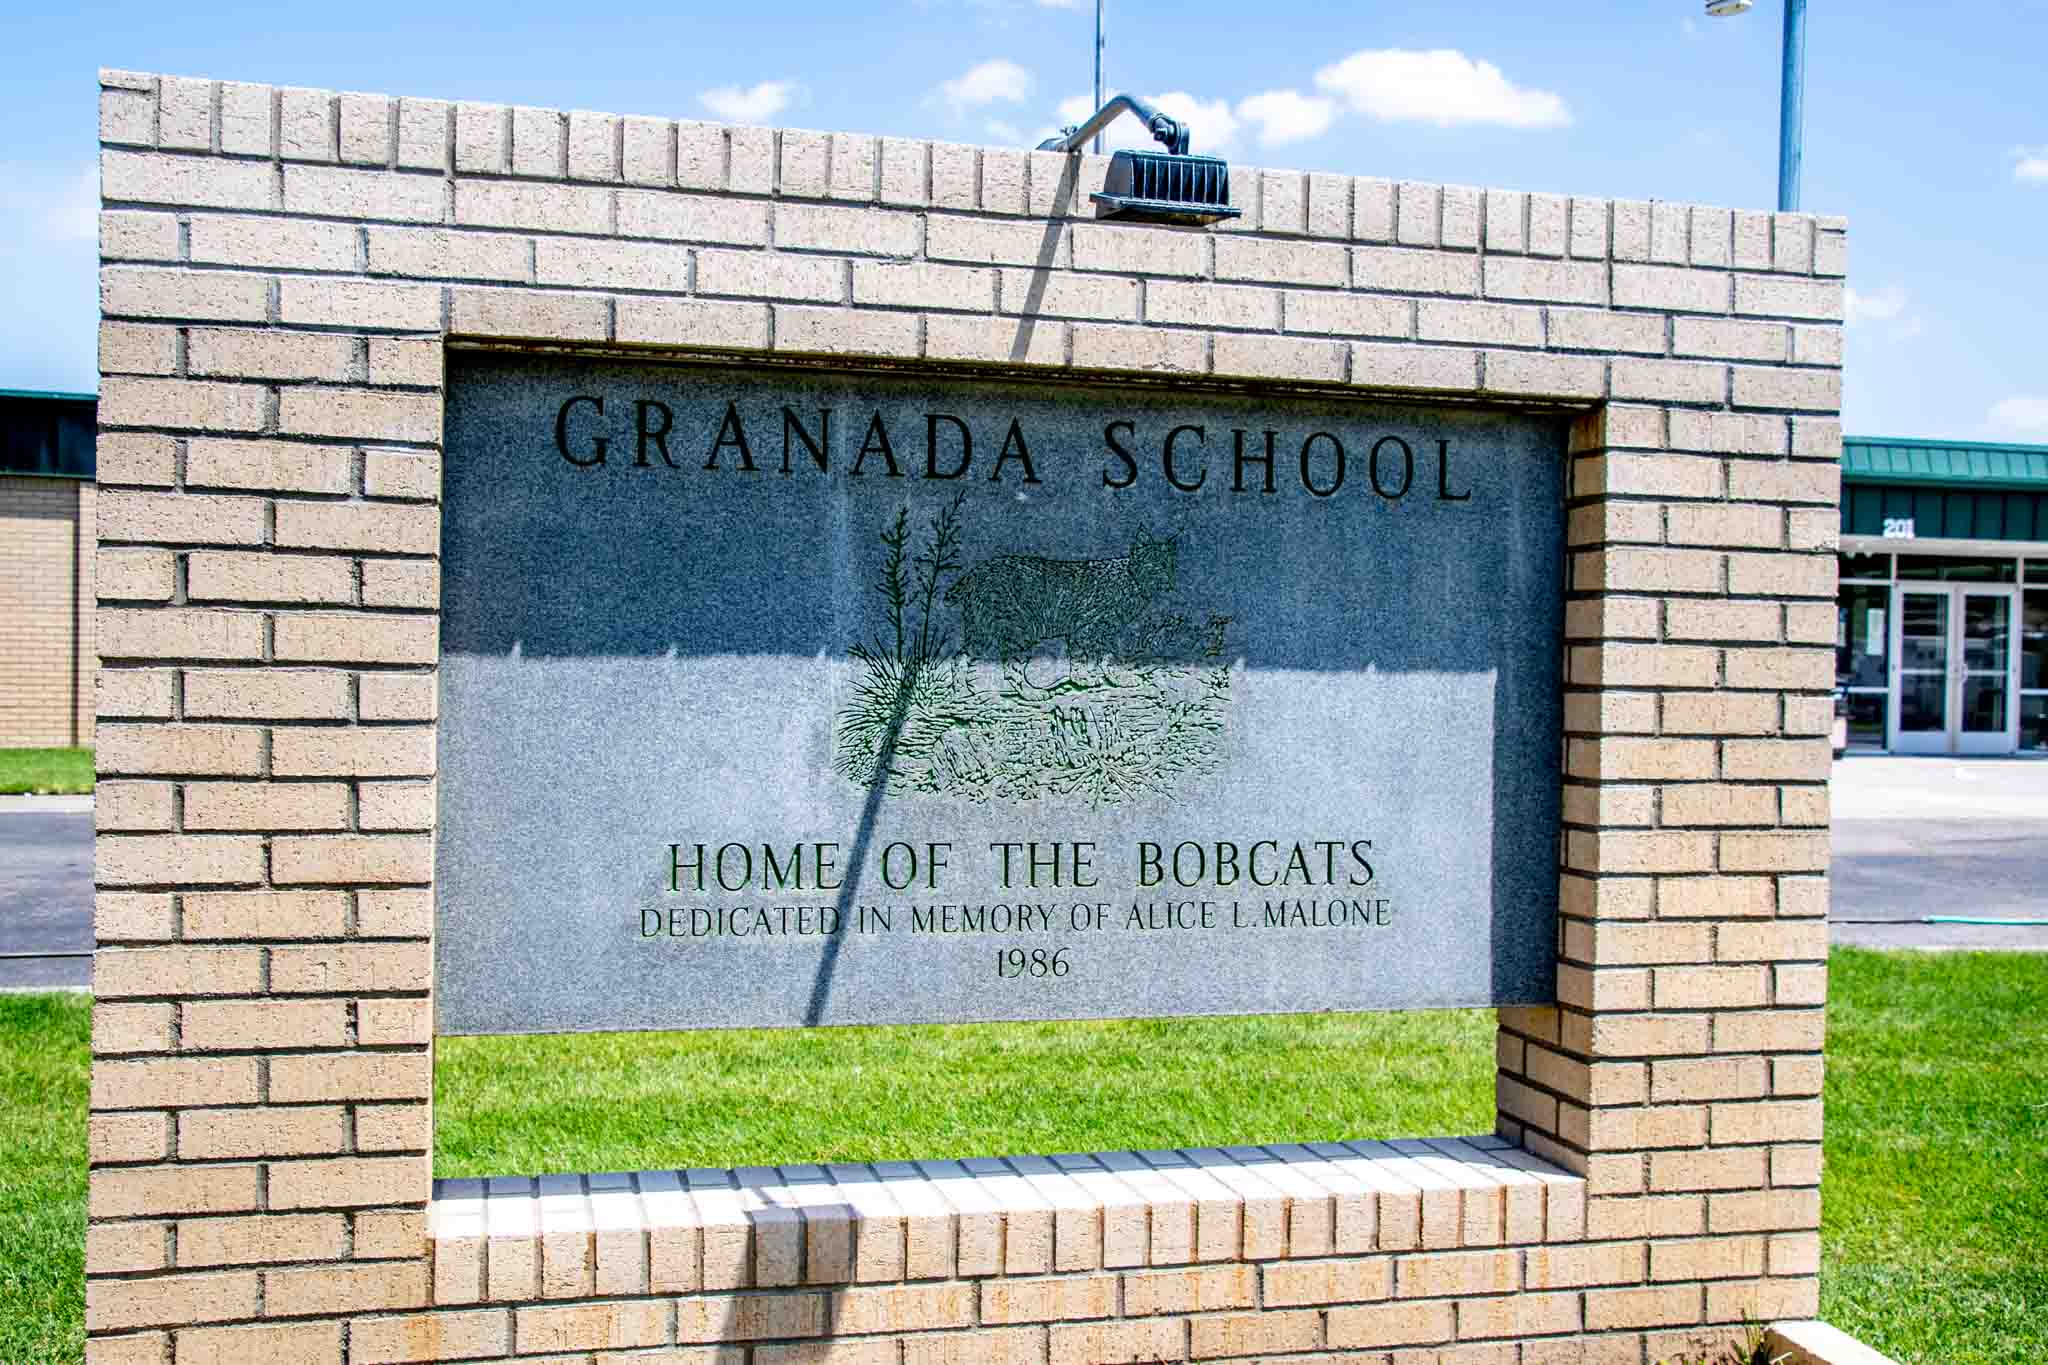 Sign for the Granada School, home of the Bobcats